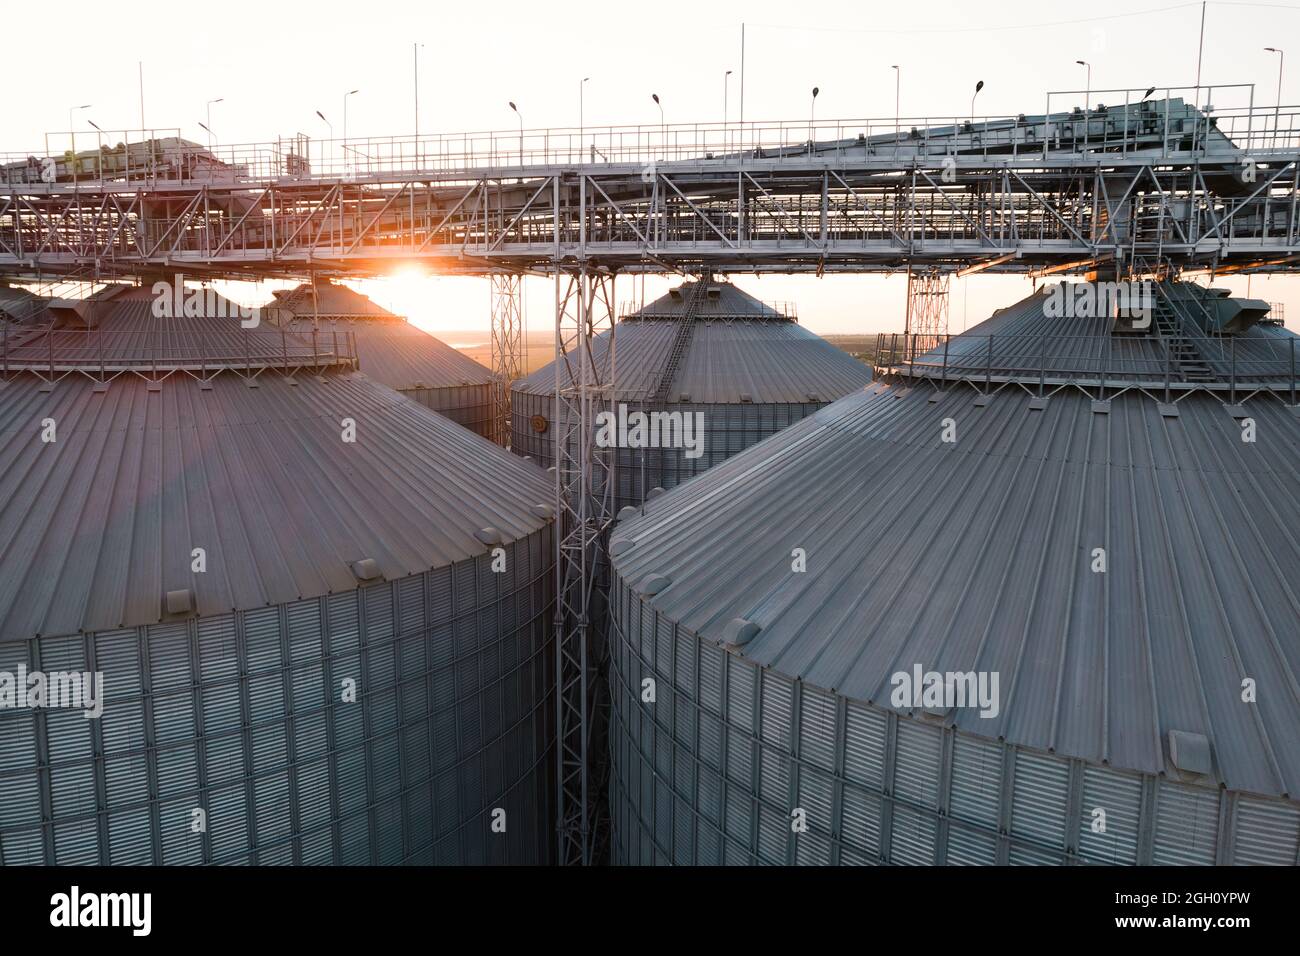 Grain terminals of modern sea commercial port. Silos for storing grain in rays of setting sun, top view from quadcopter. Industrial background. Logist Stock Photo